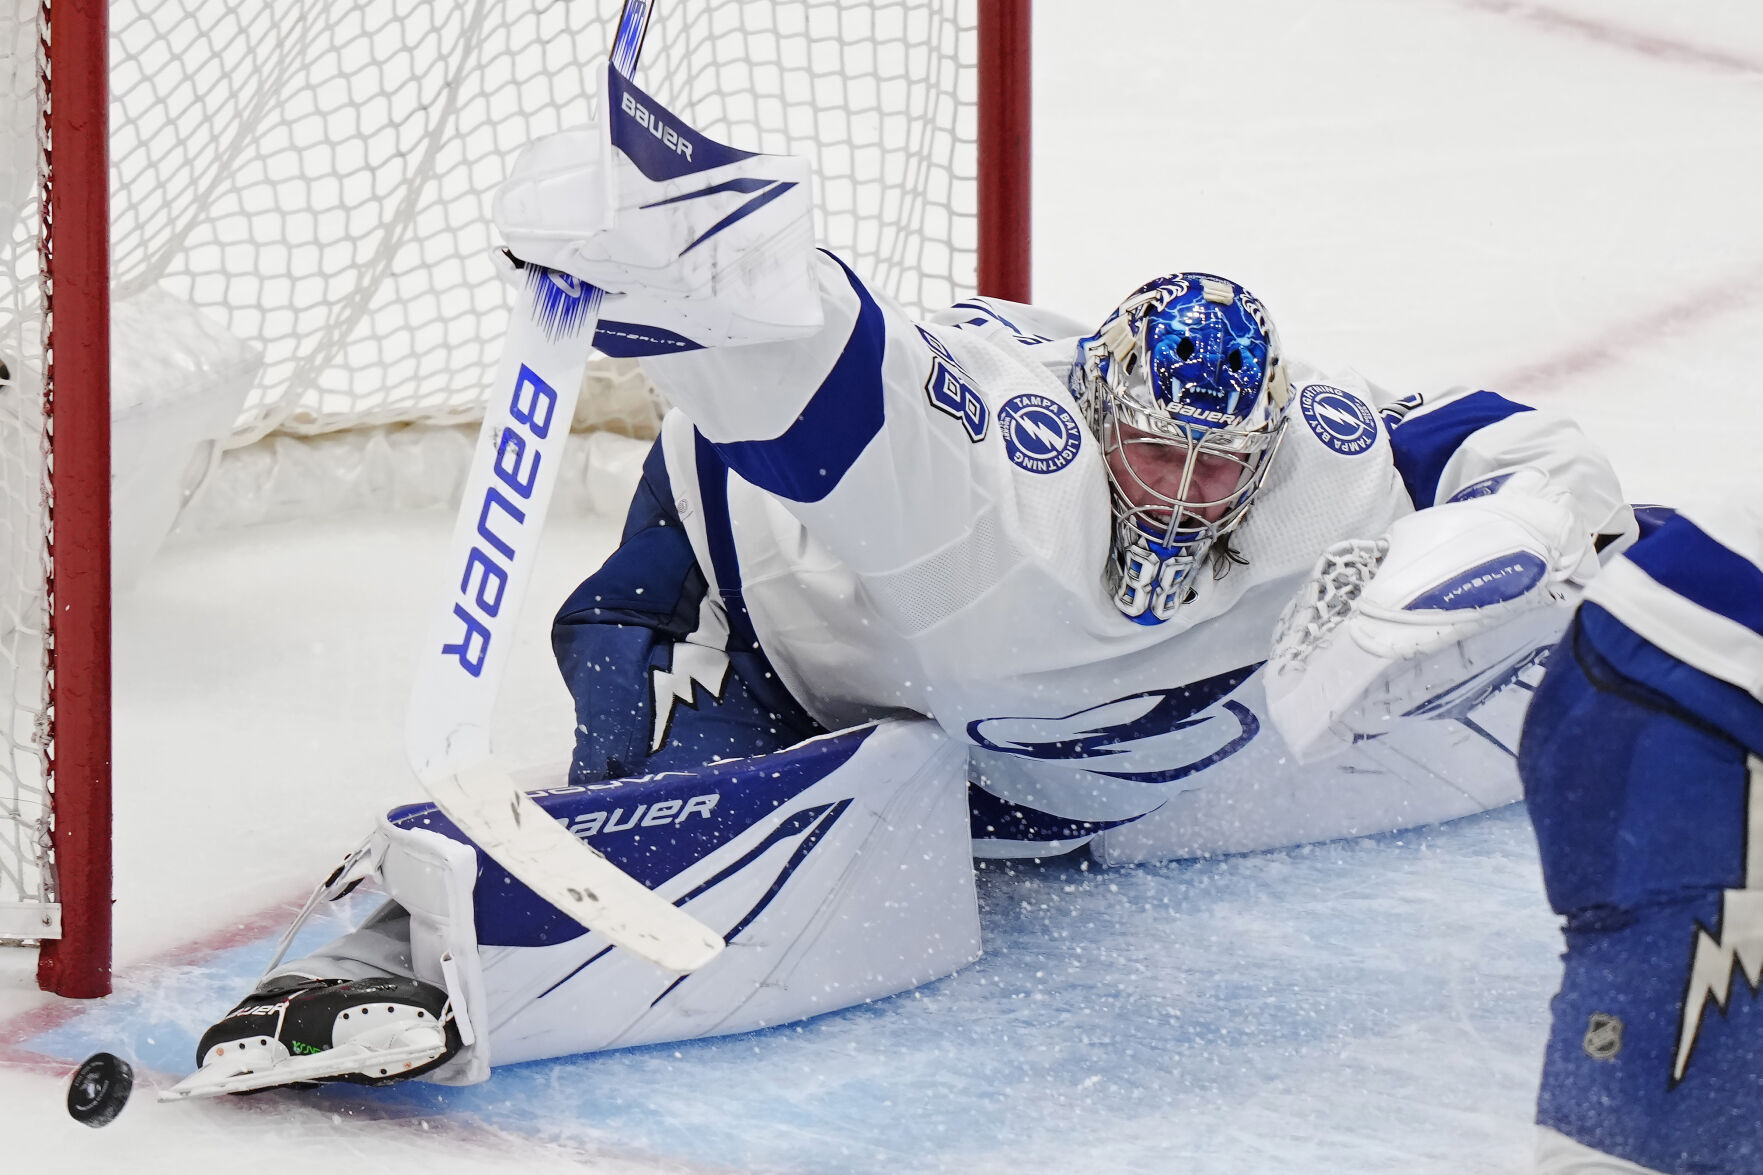 Vasilevskiy remains the choice among NHL skaters for the title of best goalie in the world image photo